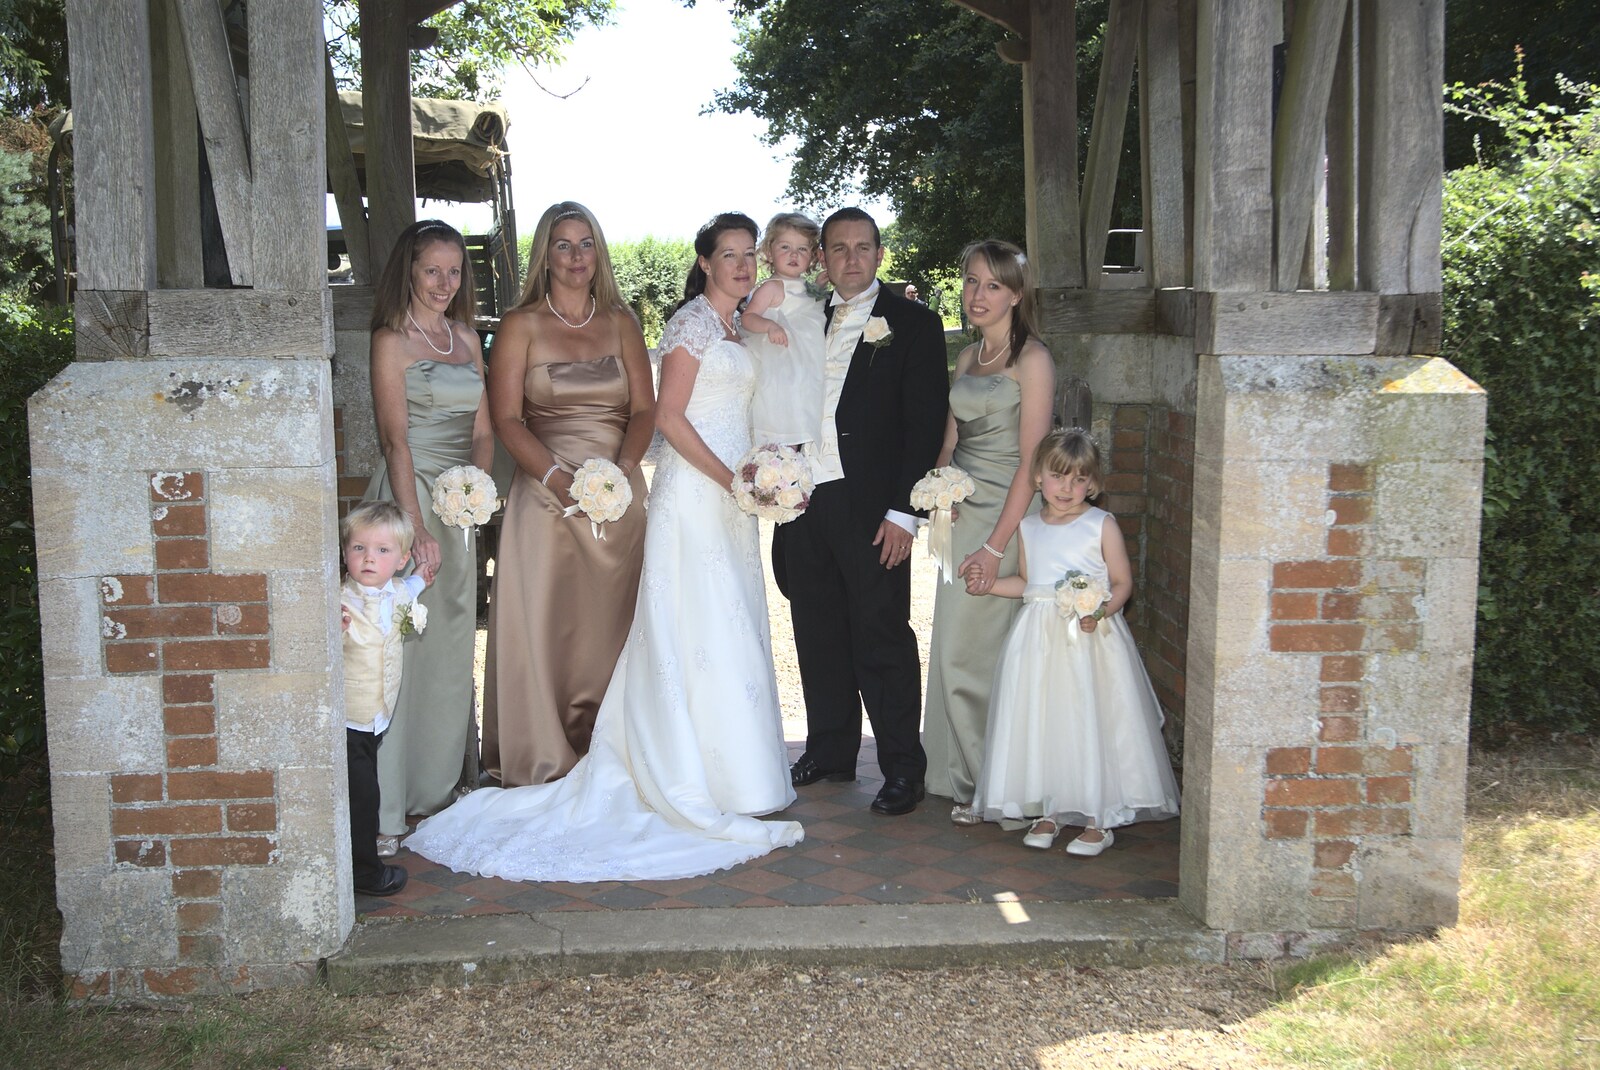 A wedding photo in the lych gate from Clive and Suzanne's Wedding, Oakley and Brome, Suffolk - 10th July 2010